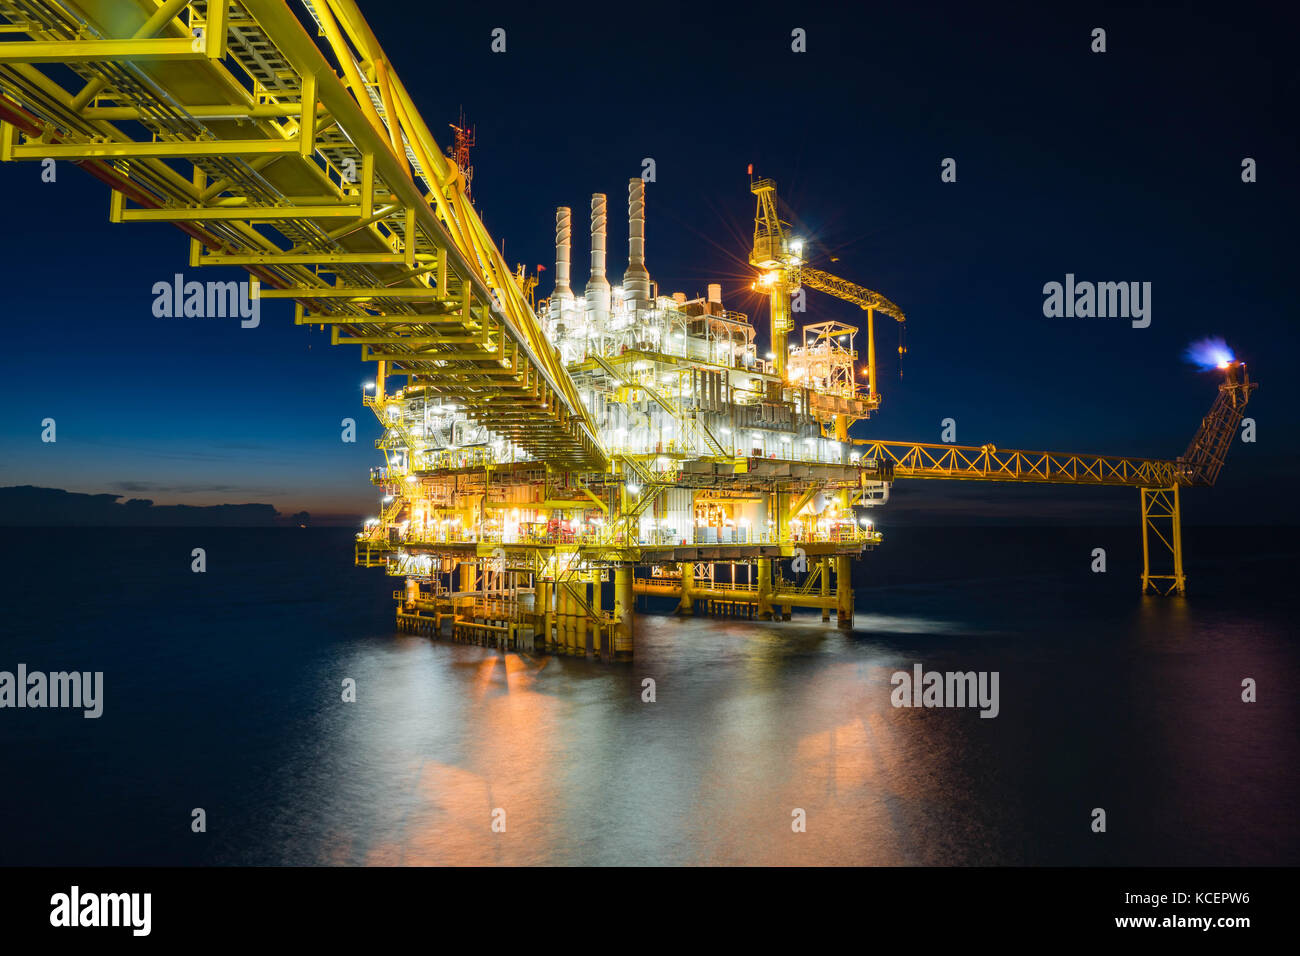 Offshore oil and gas central processing platform where up stream of petrochemical and energy product. Stock Photo